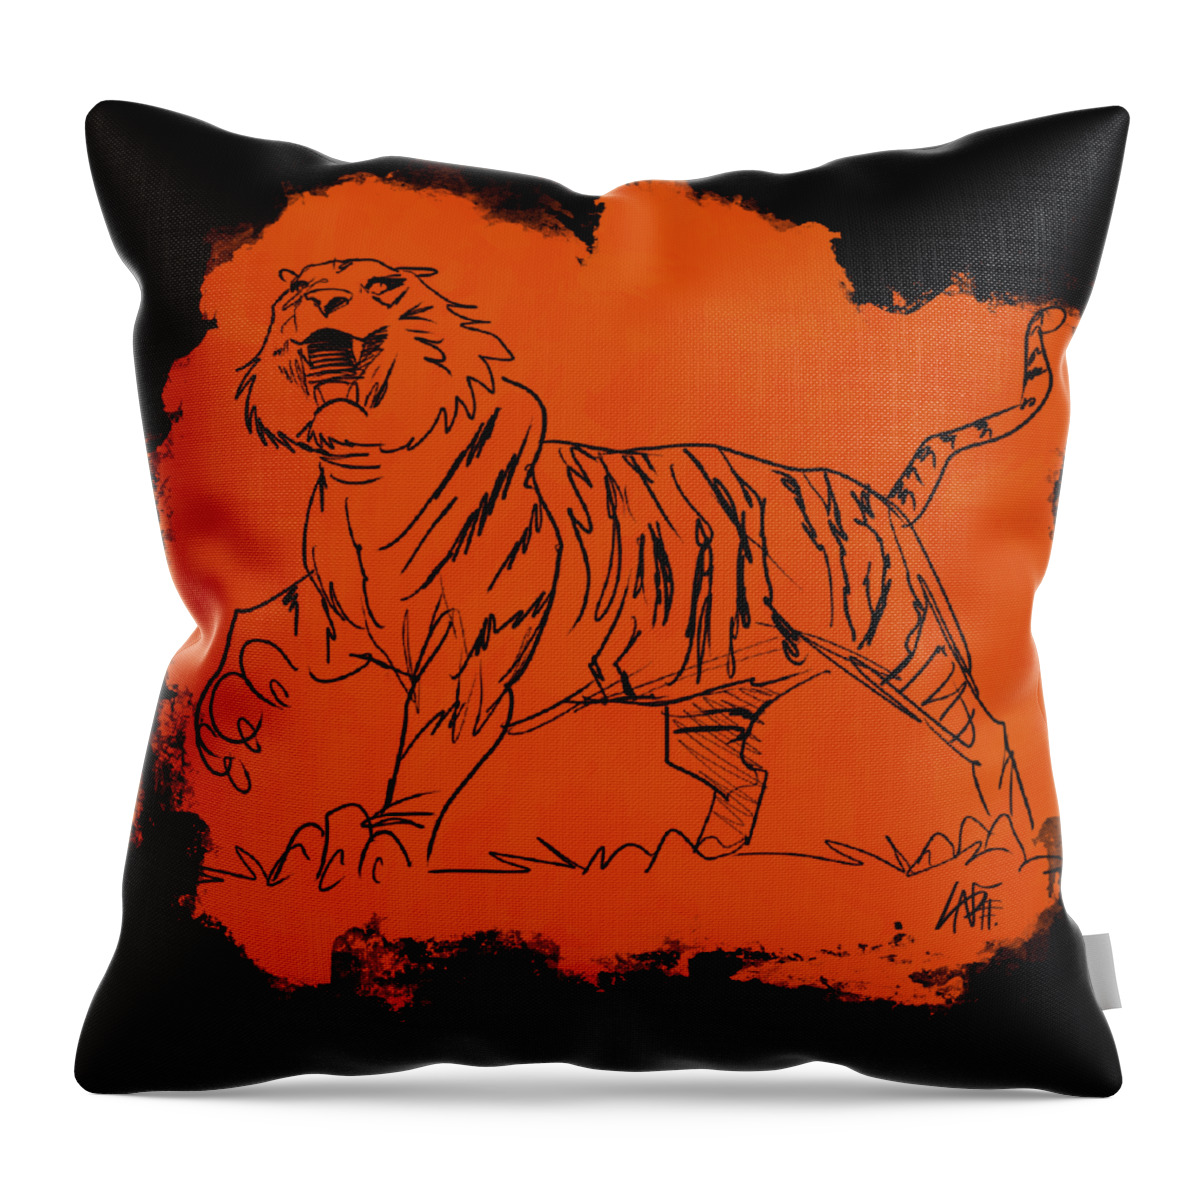 Tiger Throw Pillow featuring the drawing Tiger Gesture Sketch by John LaFree